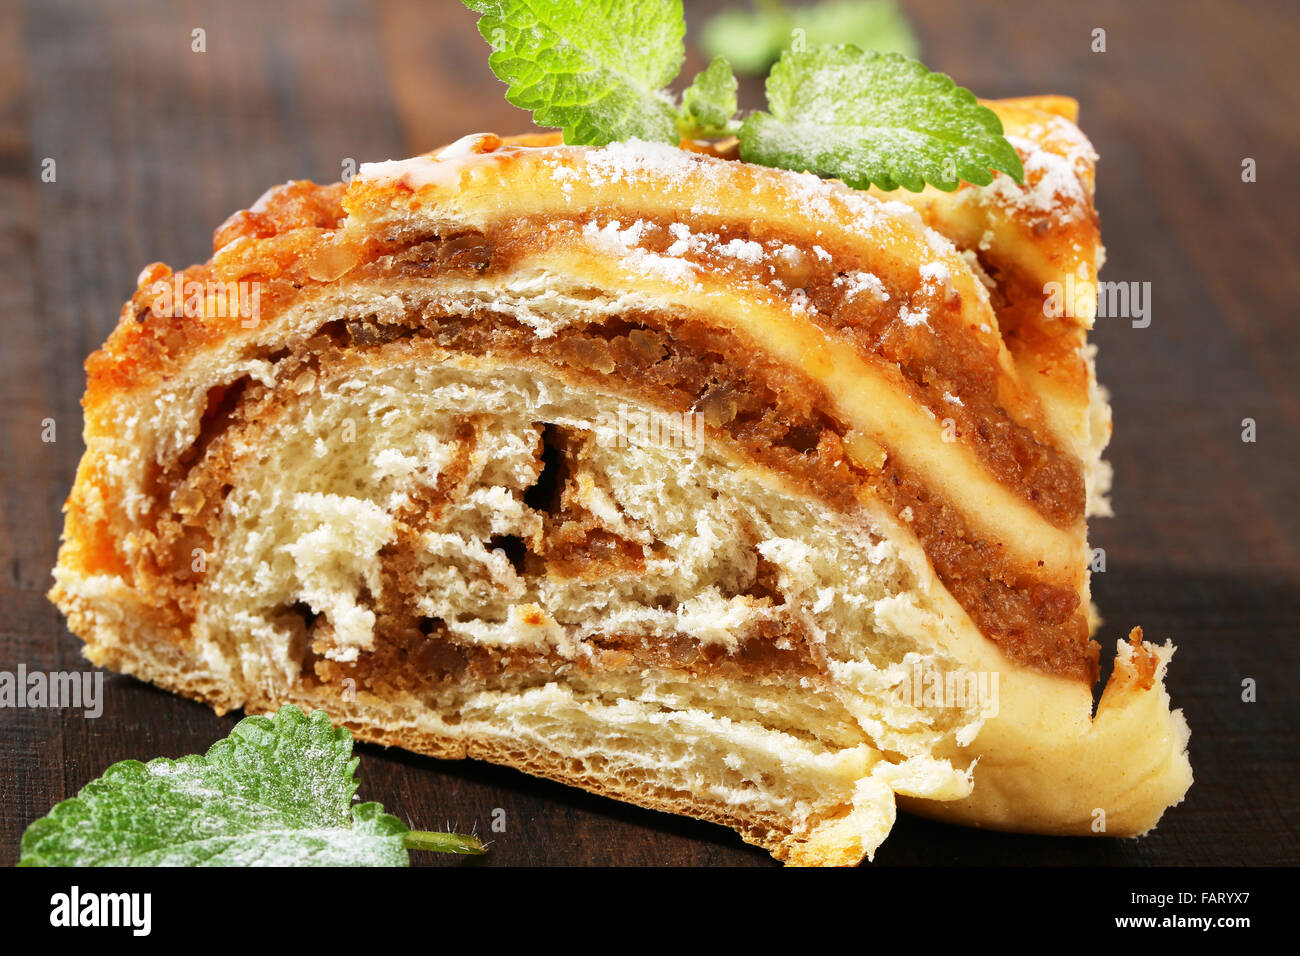 slice of yeast cake with nut filling Stock Photo